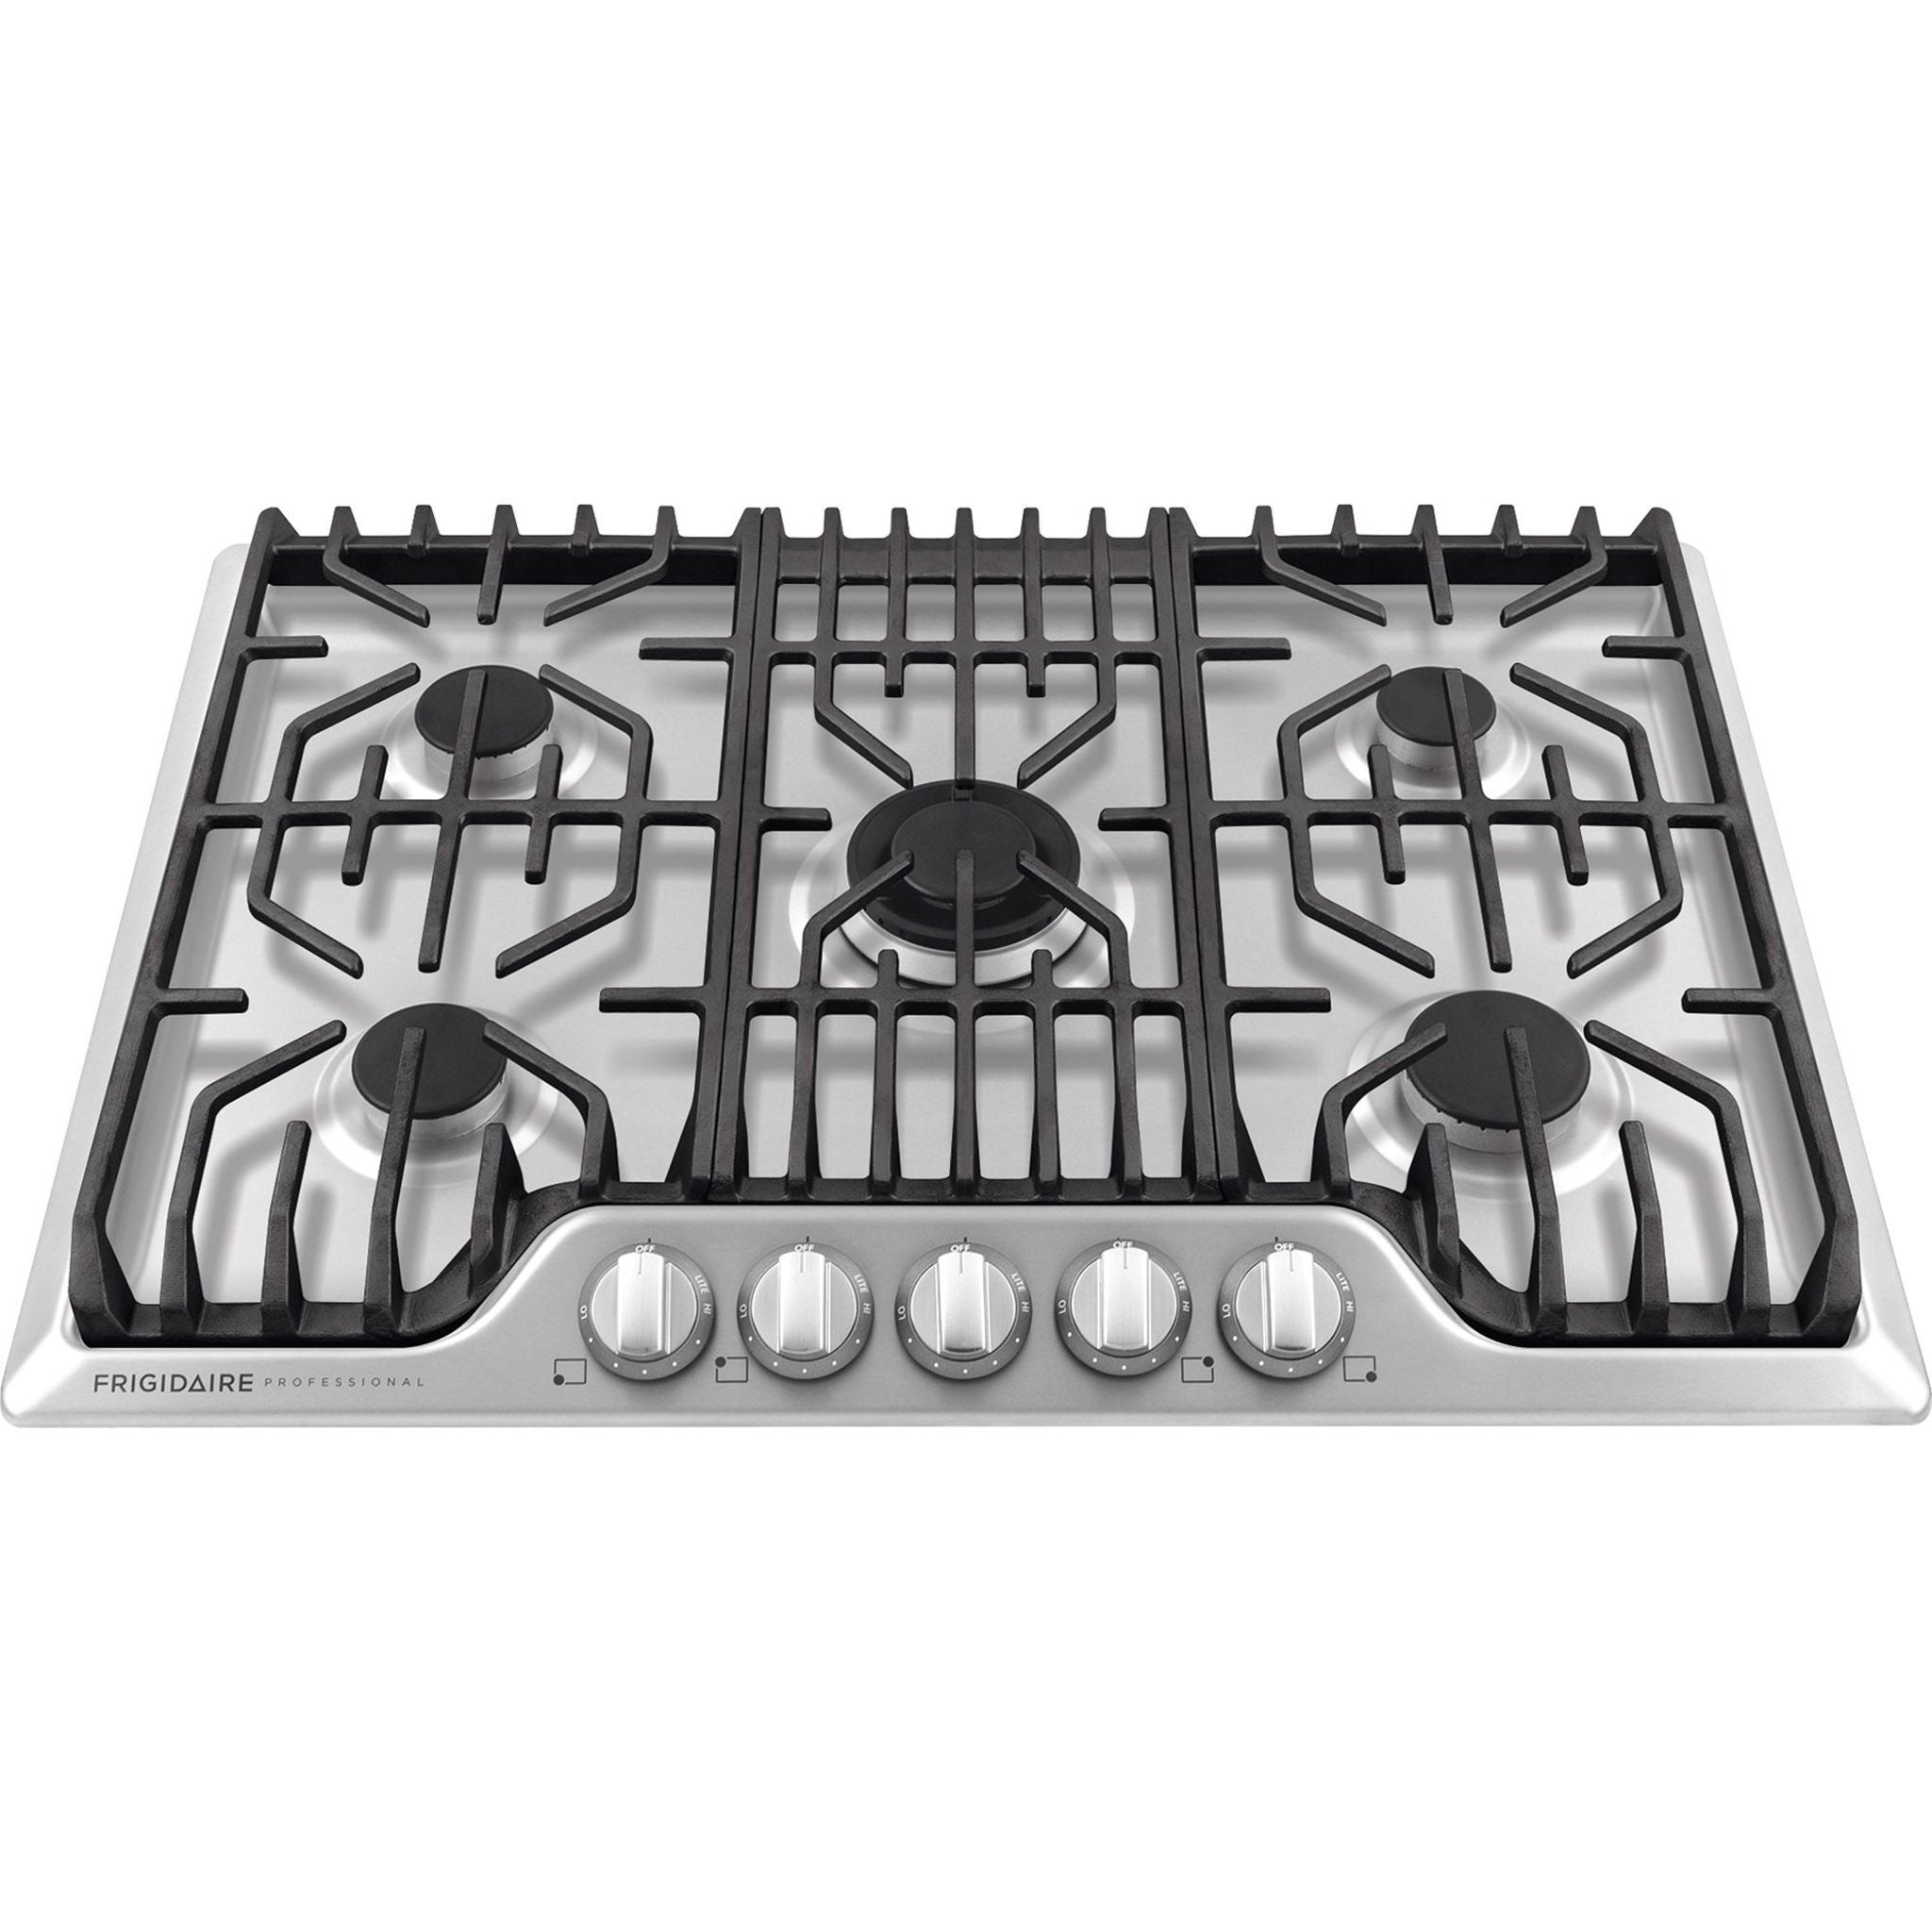 Frigidaire Professional, Frigidaire Professional 30" Gas Cooktop (FPGC3077RS) - Stainless Steel